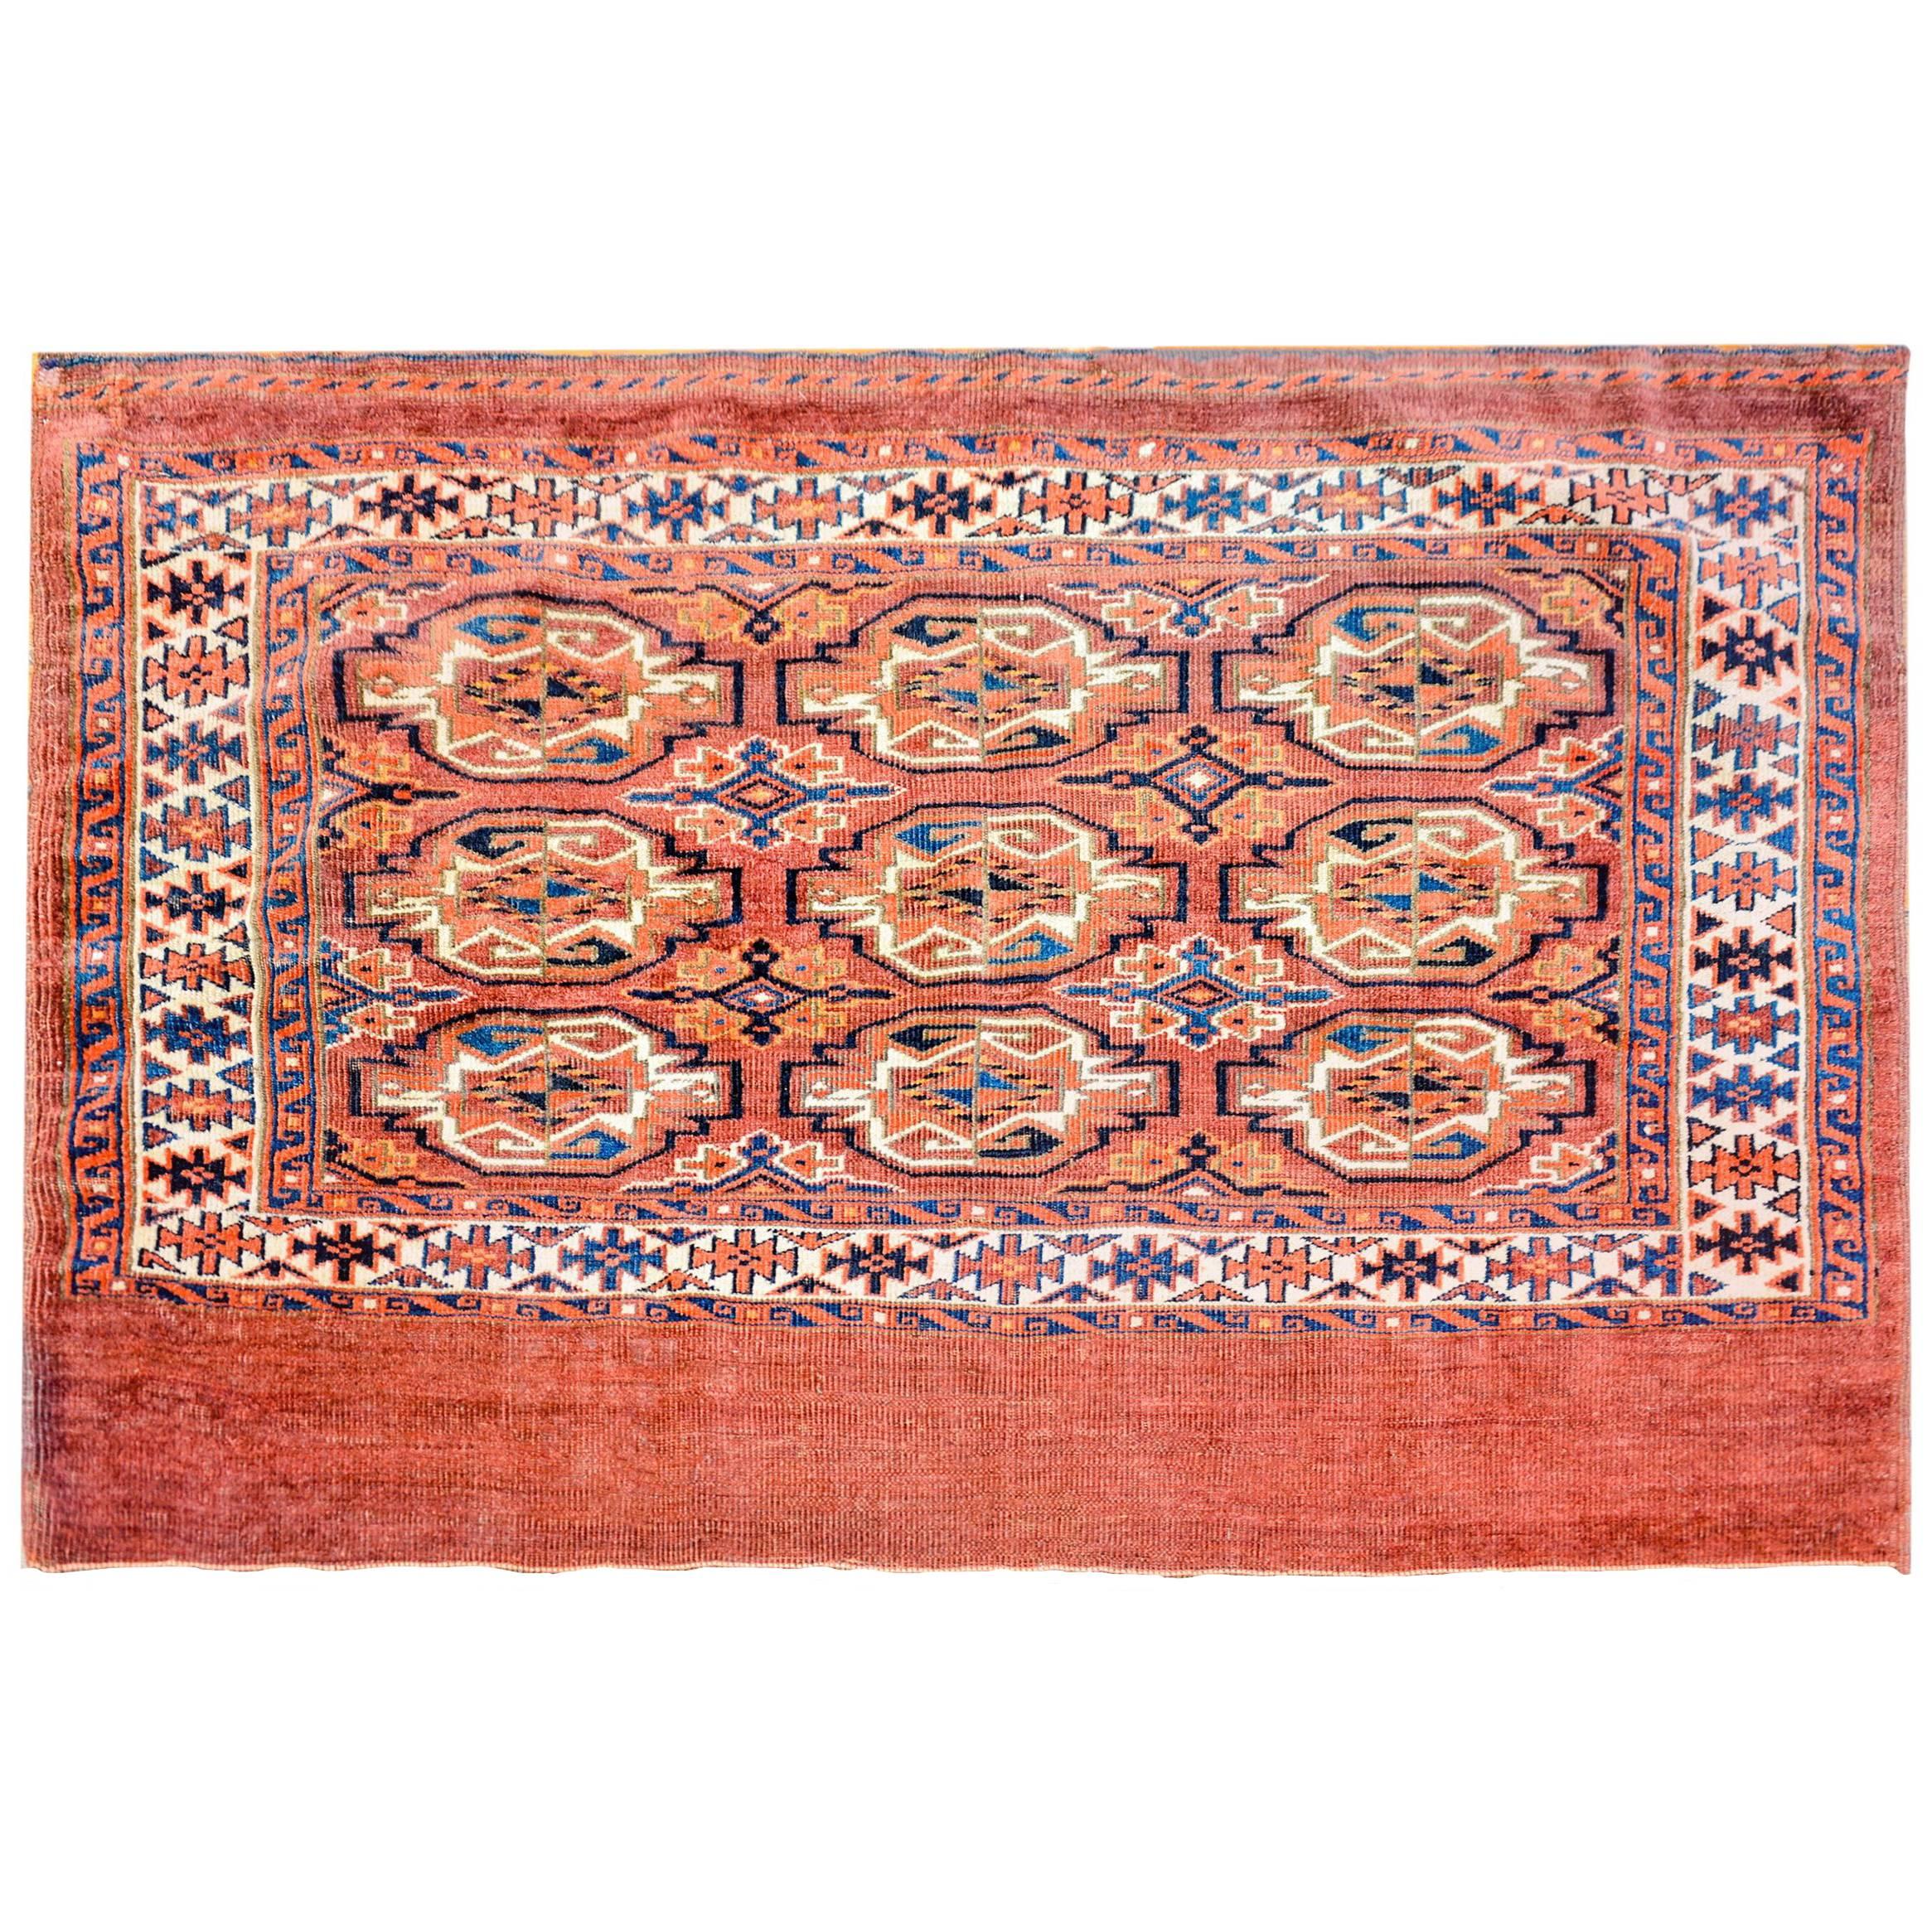 Early 20th Century Yamut Rug